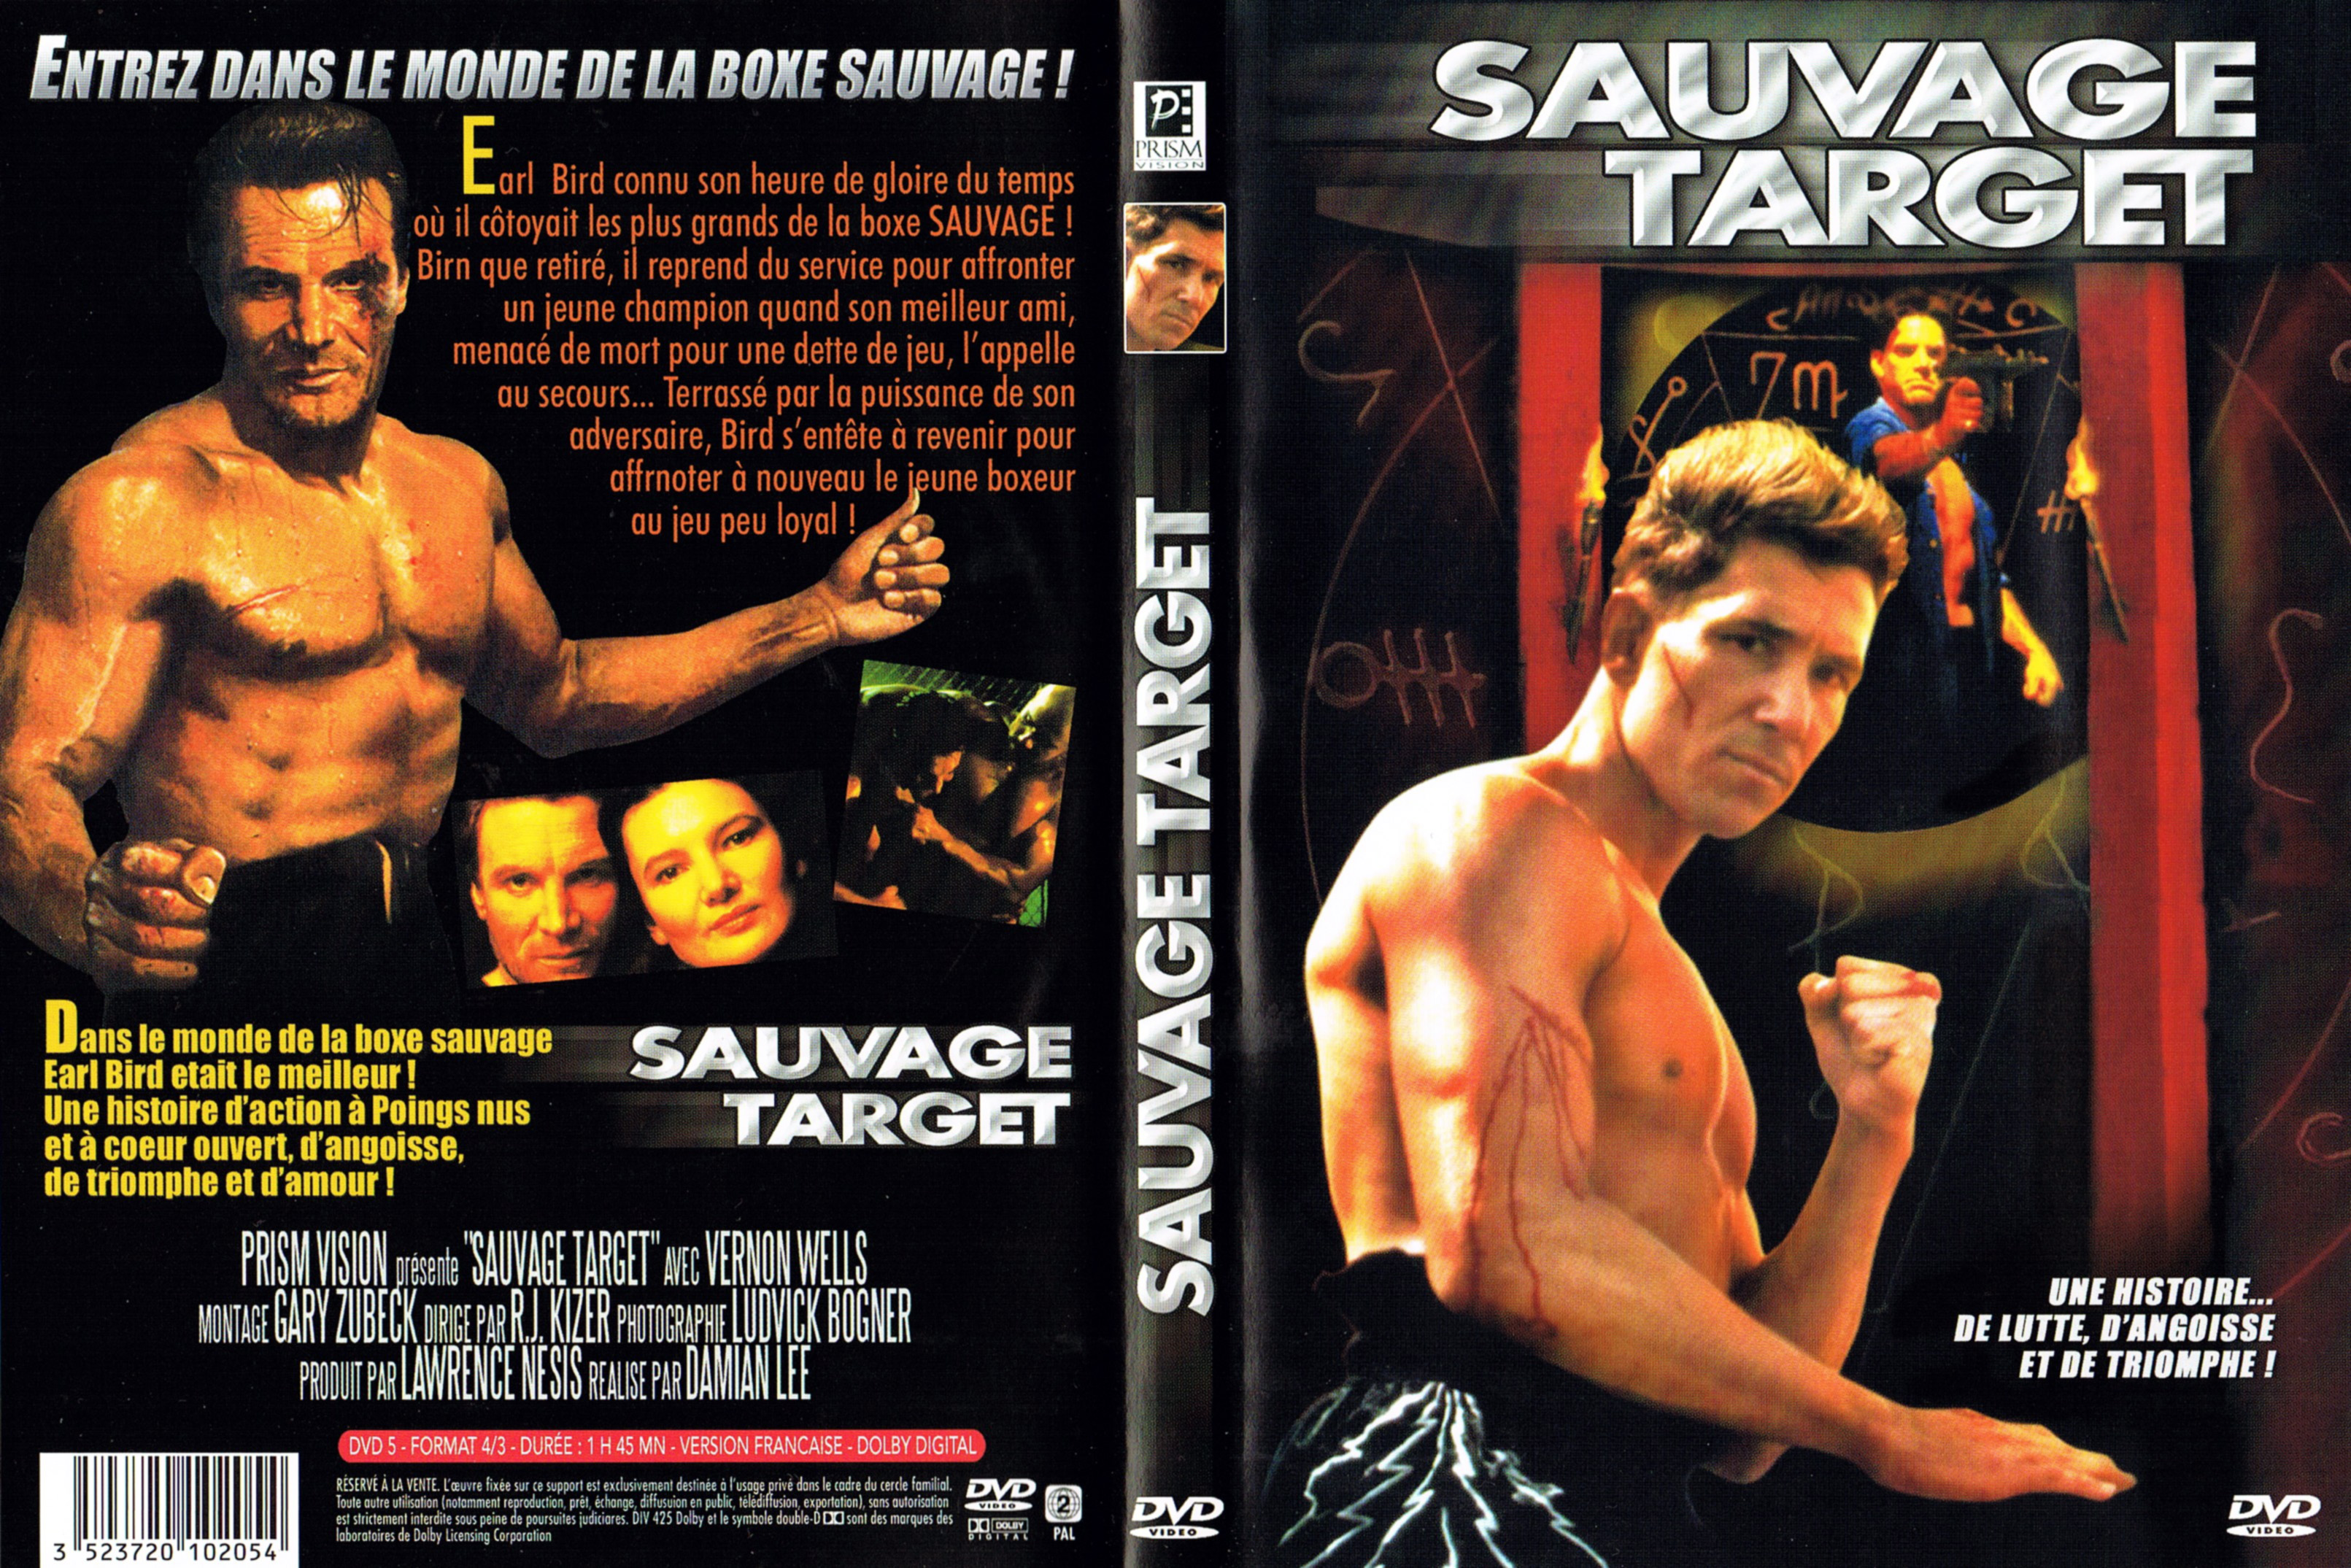 Jaquette DVD Sauvage target